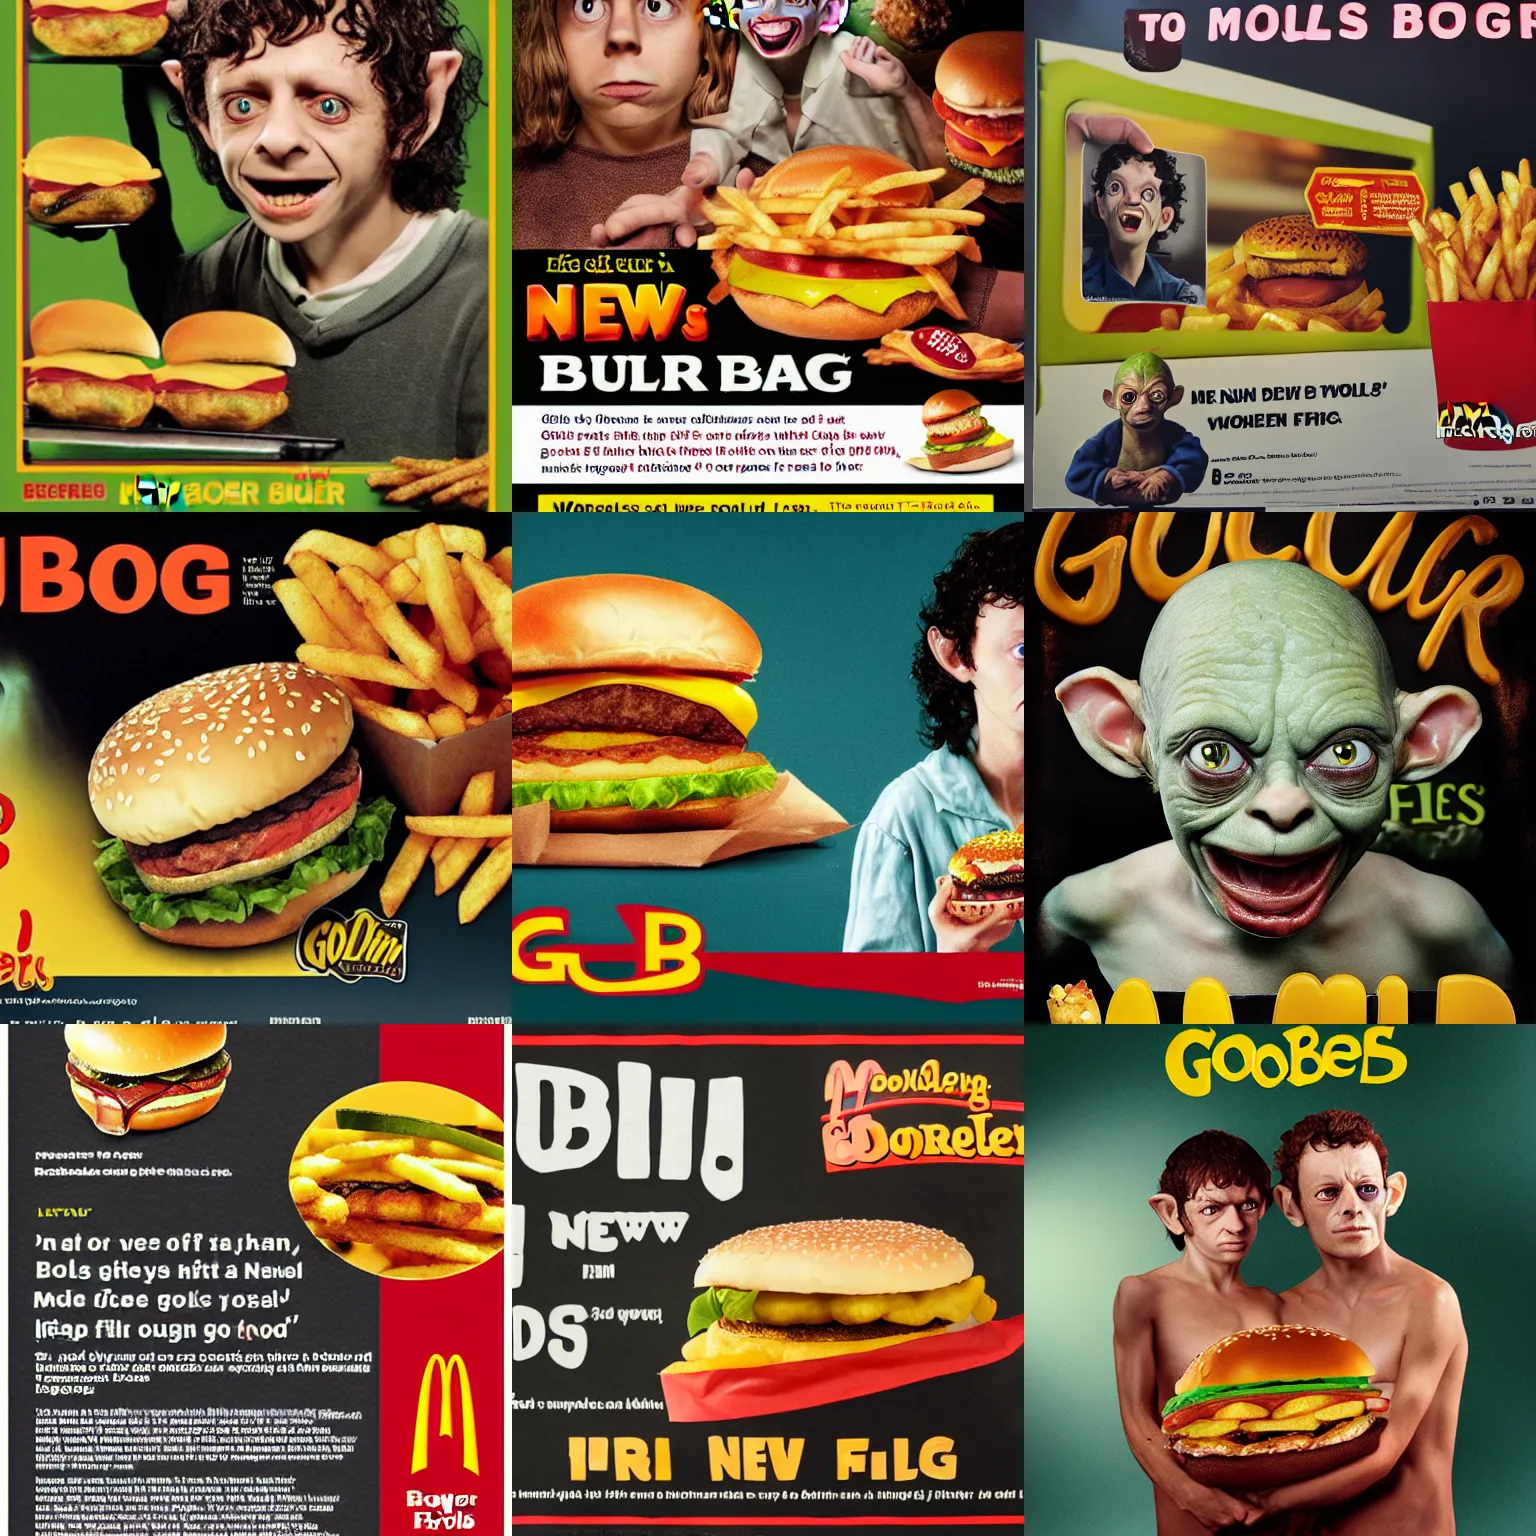 Prompt: Promotional Poster for the new Gollum burger and Frodo fries at McDonalds